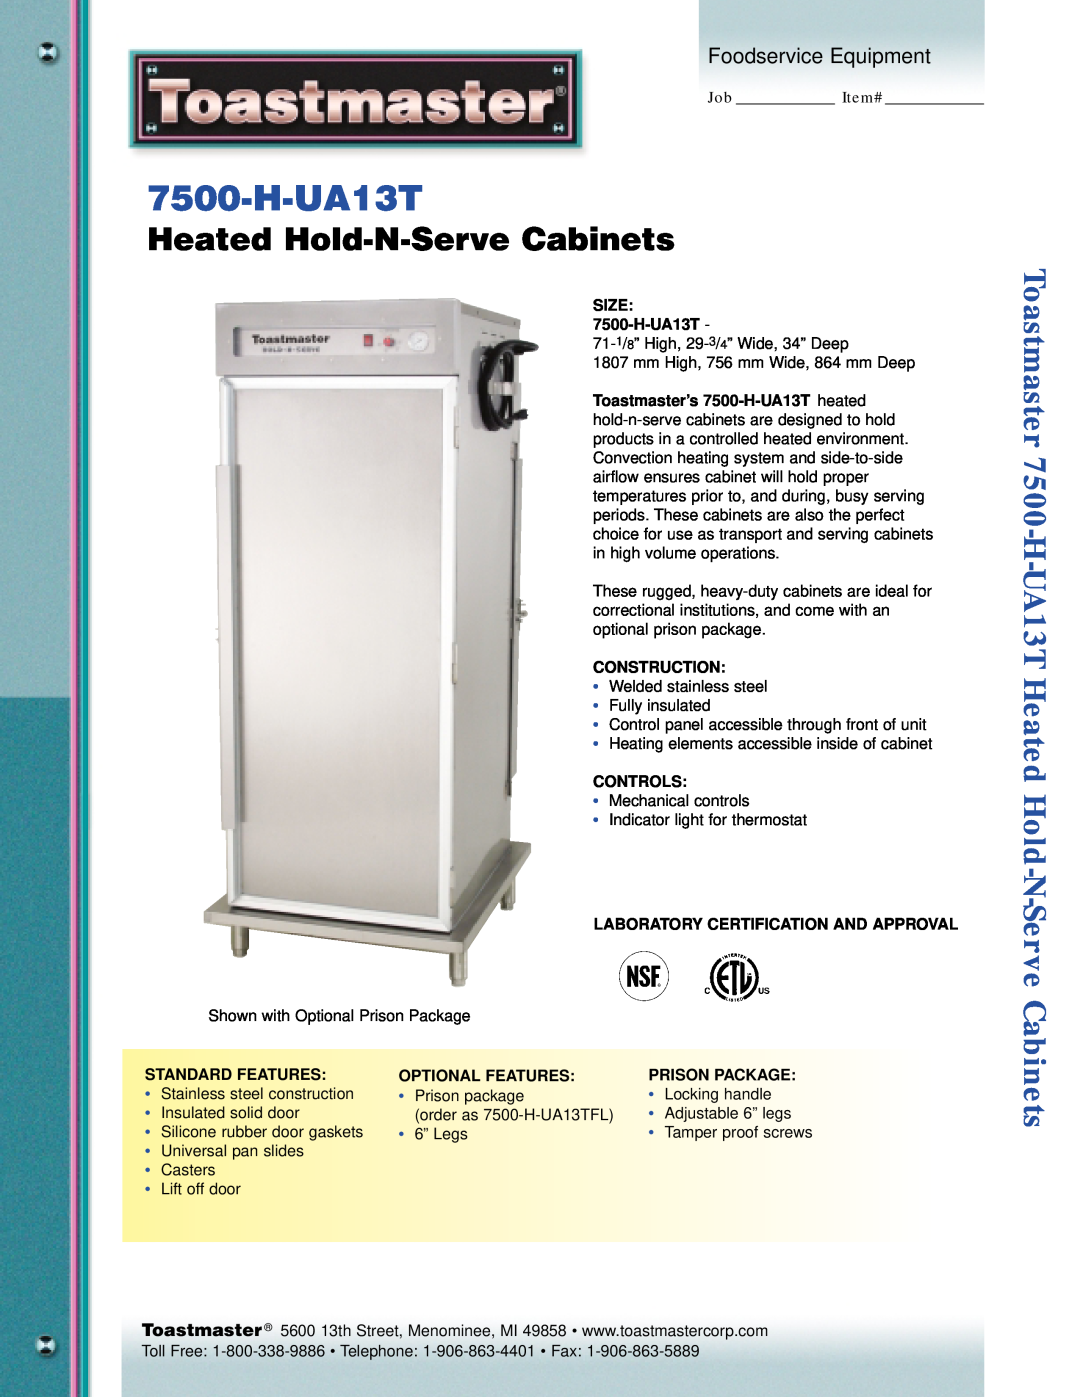 Toastmaster manual Heated Hold-N-ServeCabinets, Toastmaster 7500-H-UA13THeated Hold-N-Serve, Foodservice Equipment 